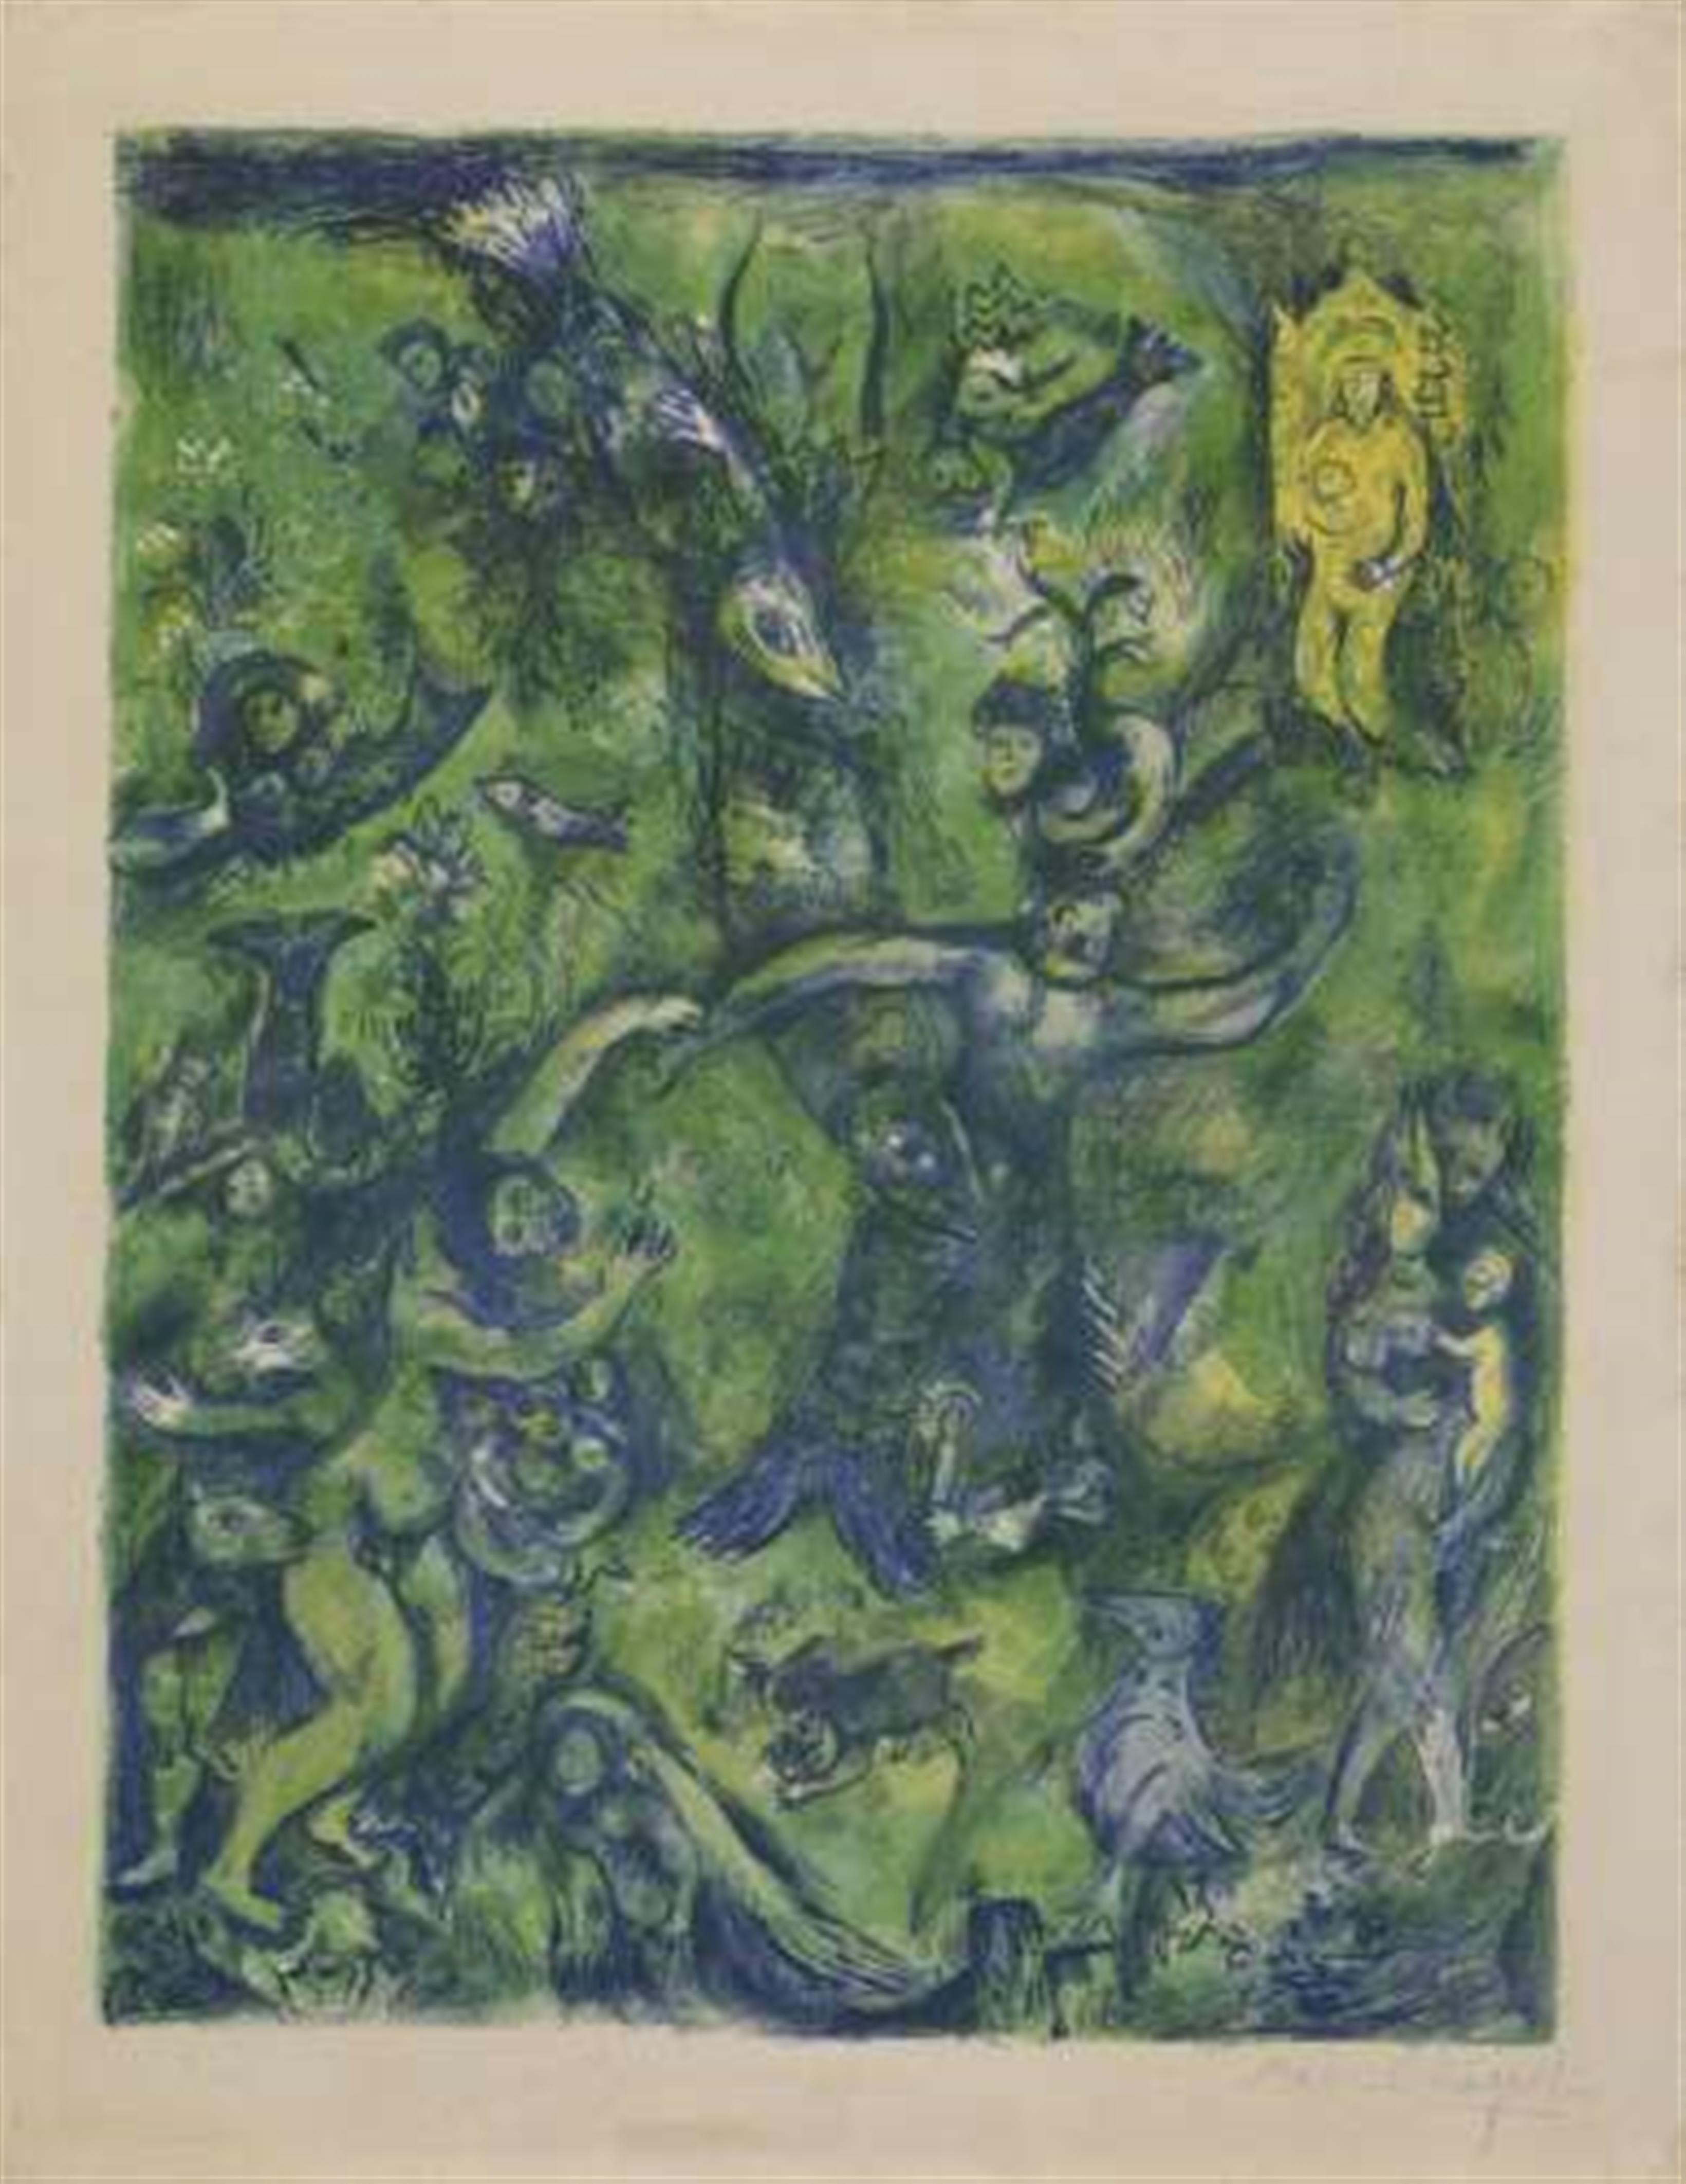 Marc Chagall - When Abdullah got the net ashore, he saw a man in it and he fled from him, but the man called out to him from within the net - image-1